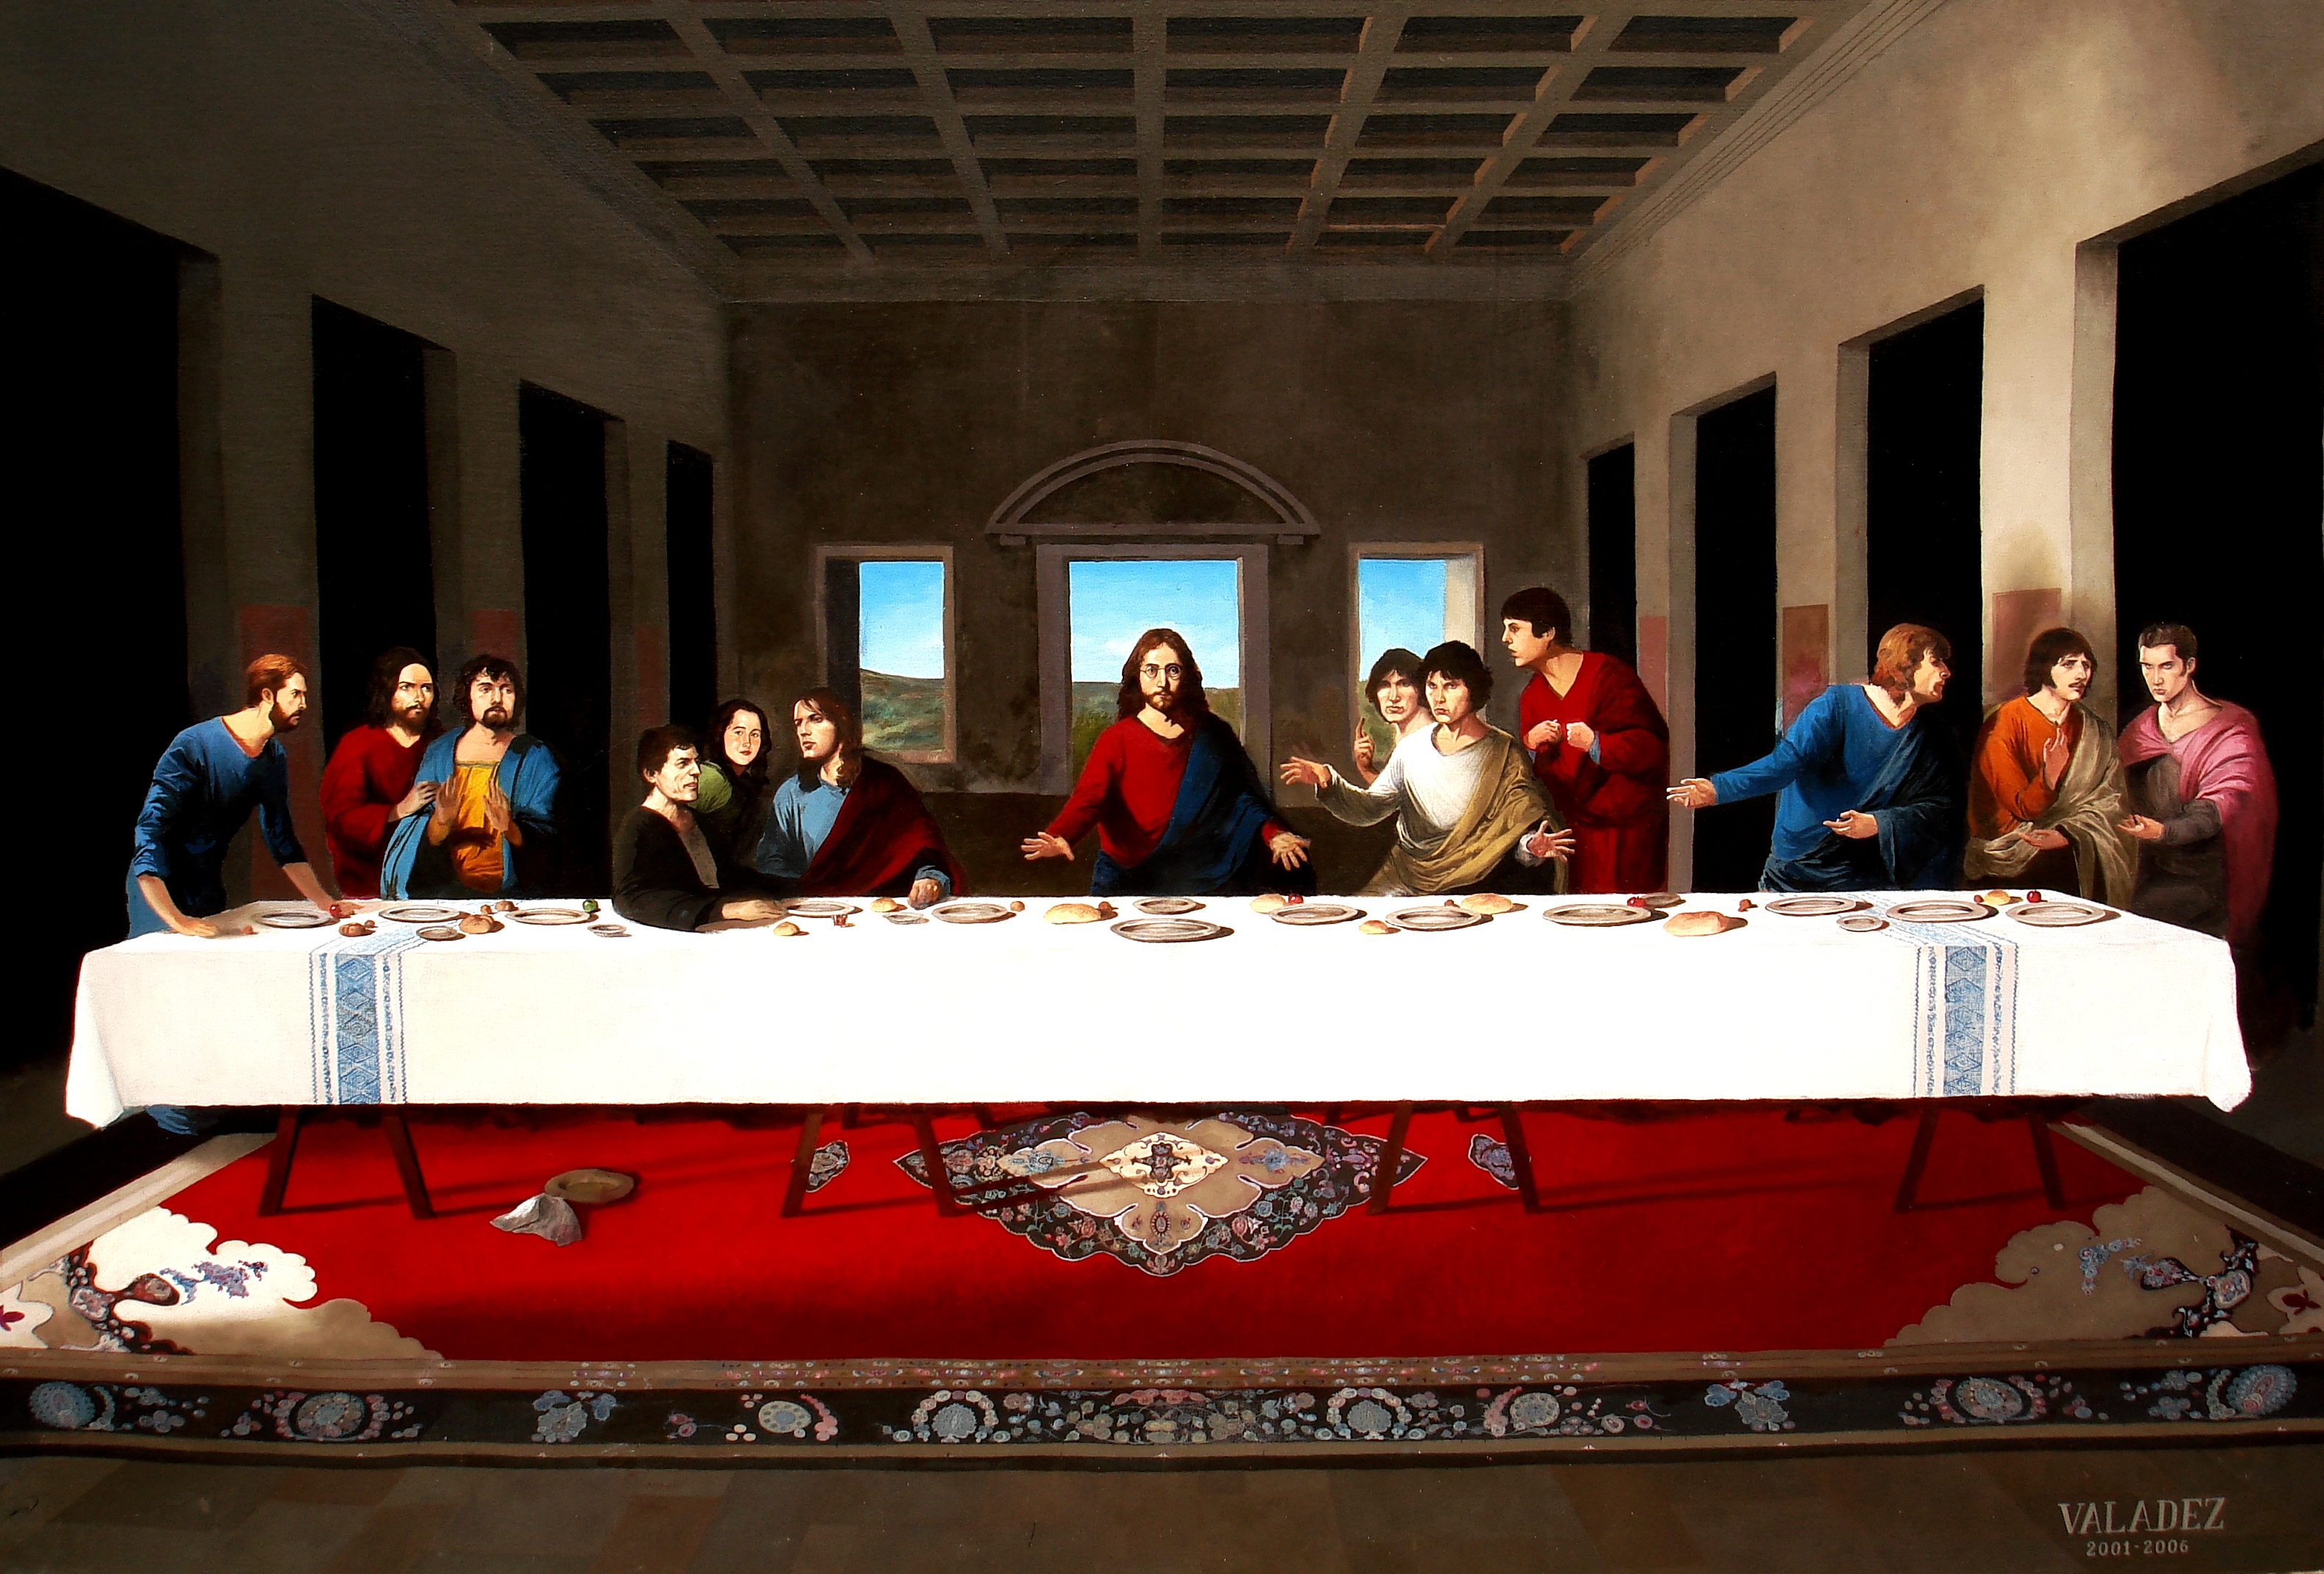 Last Supper Image Crazy Gallery